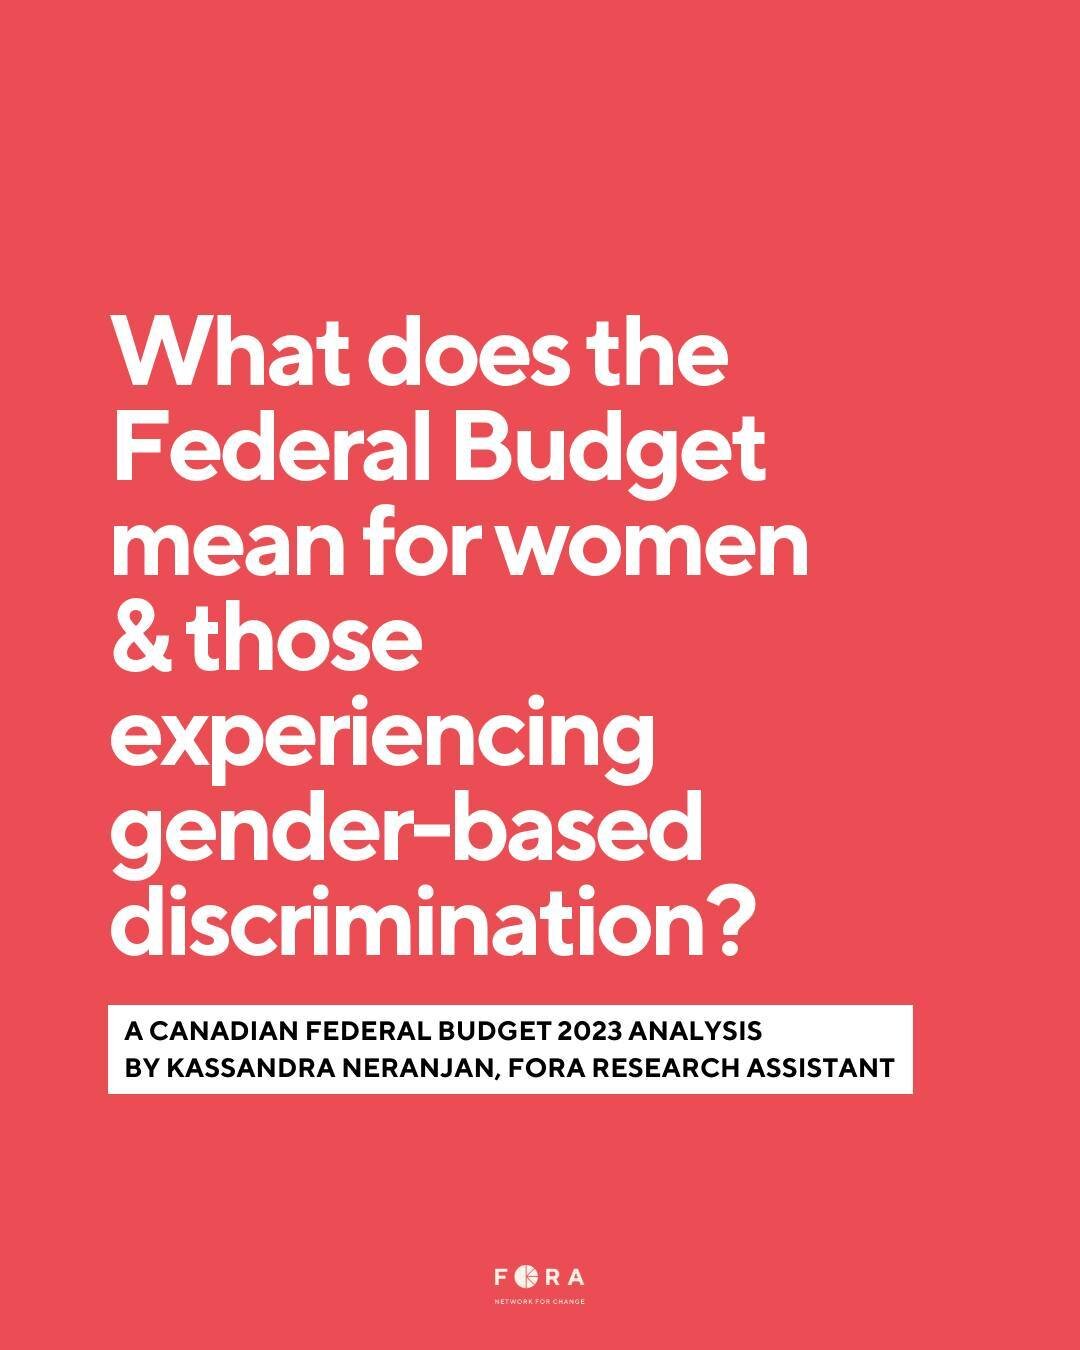 Let's talk about Canada's 2023 Federal Budget...

If you've been wondering how the 2023 Federal Budget impacts those who navigate gender-based discrimination, and where it falls short, this post has you covered. 

Fora's Research Assistant, Kassandra